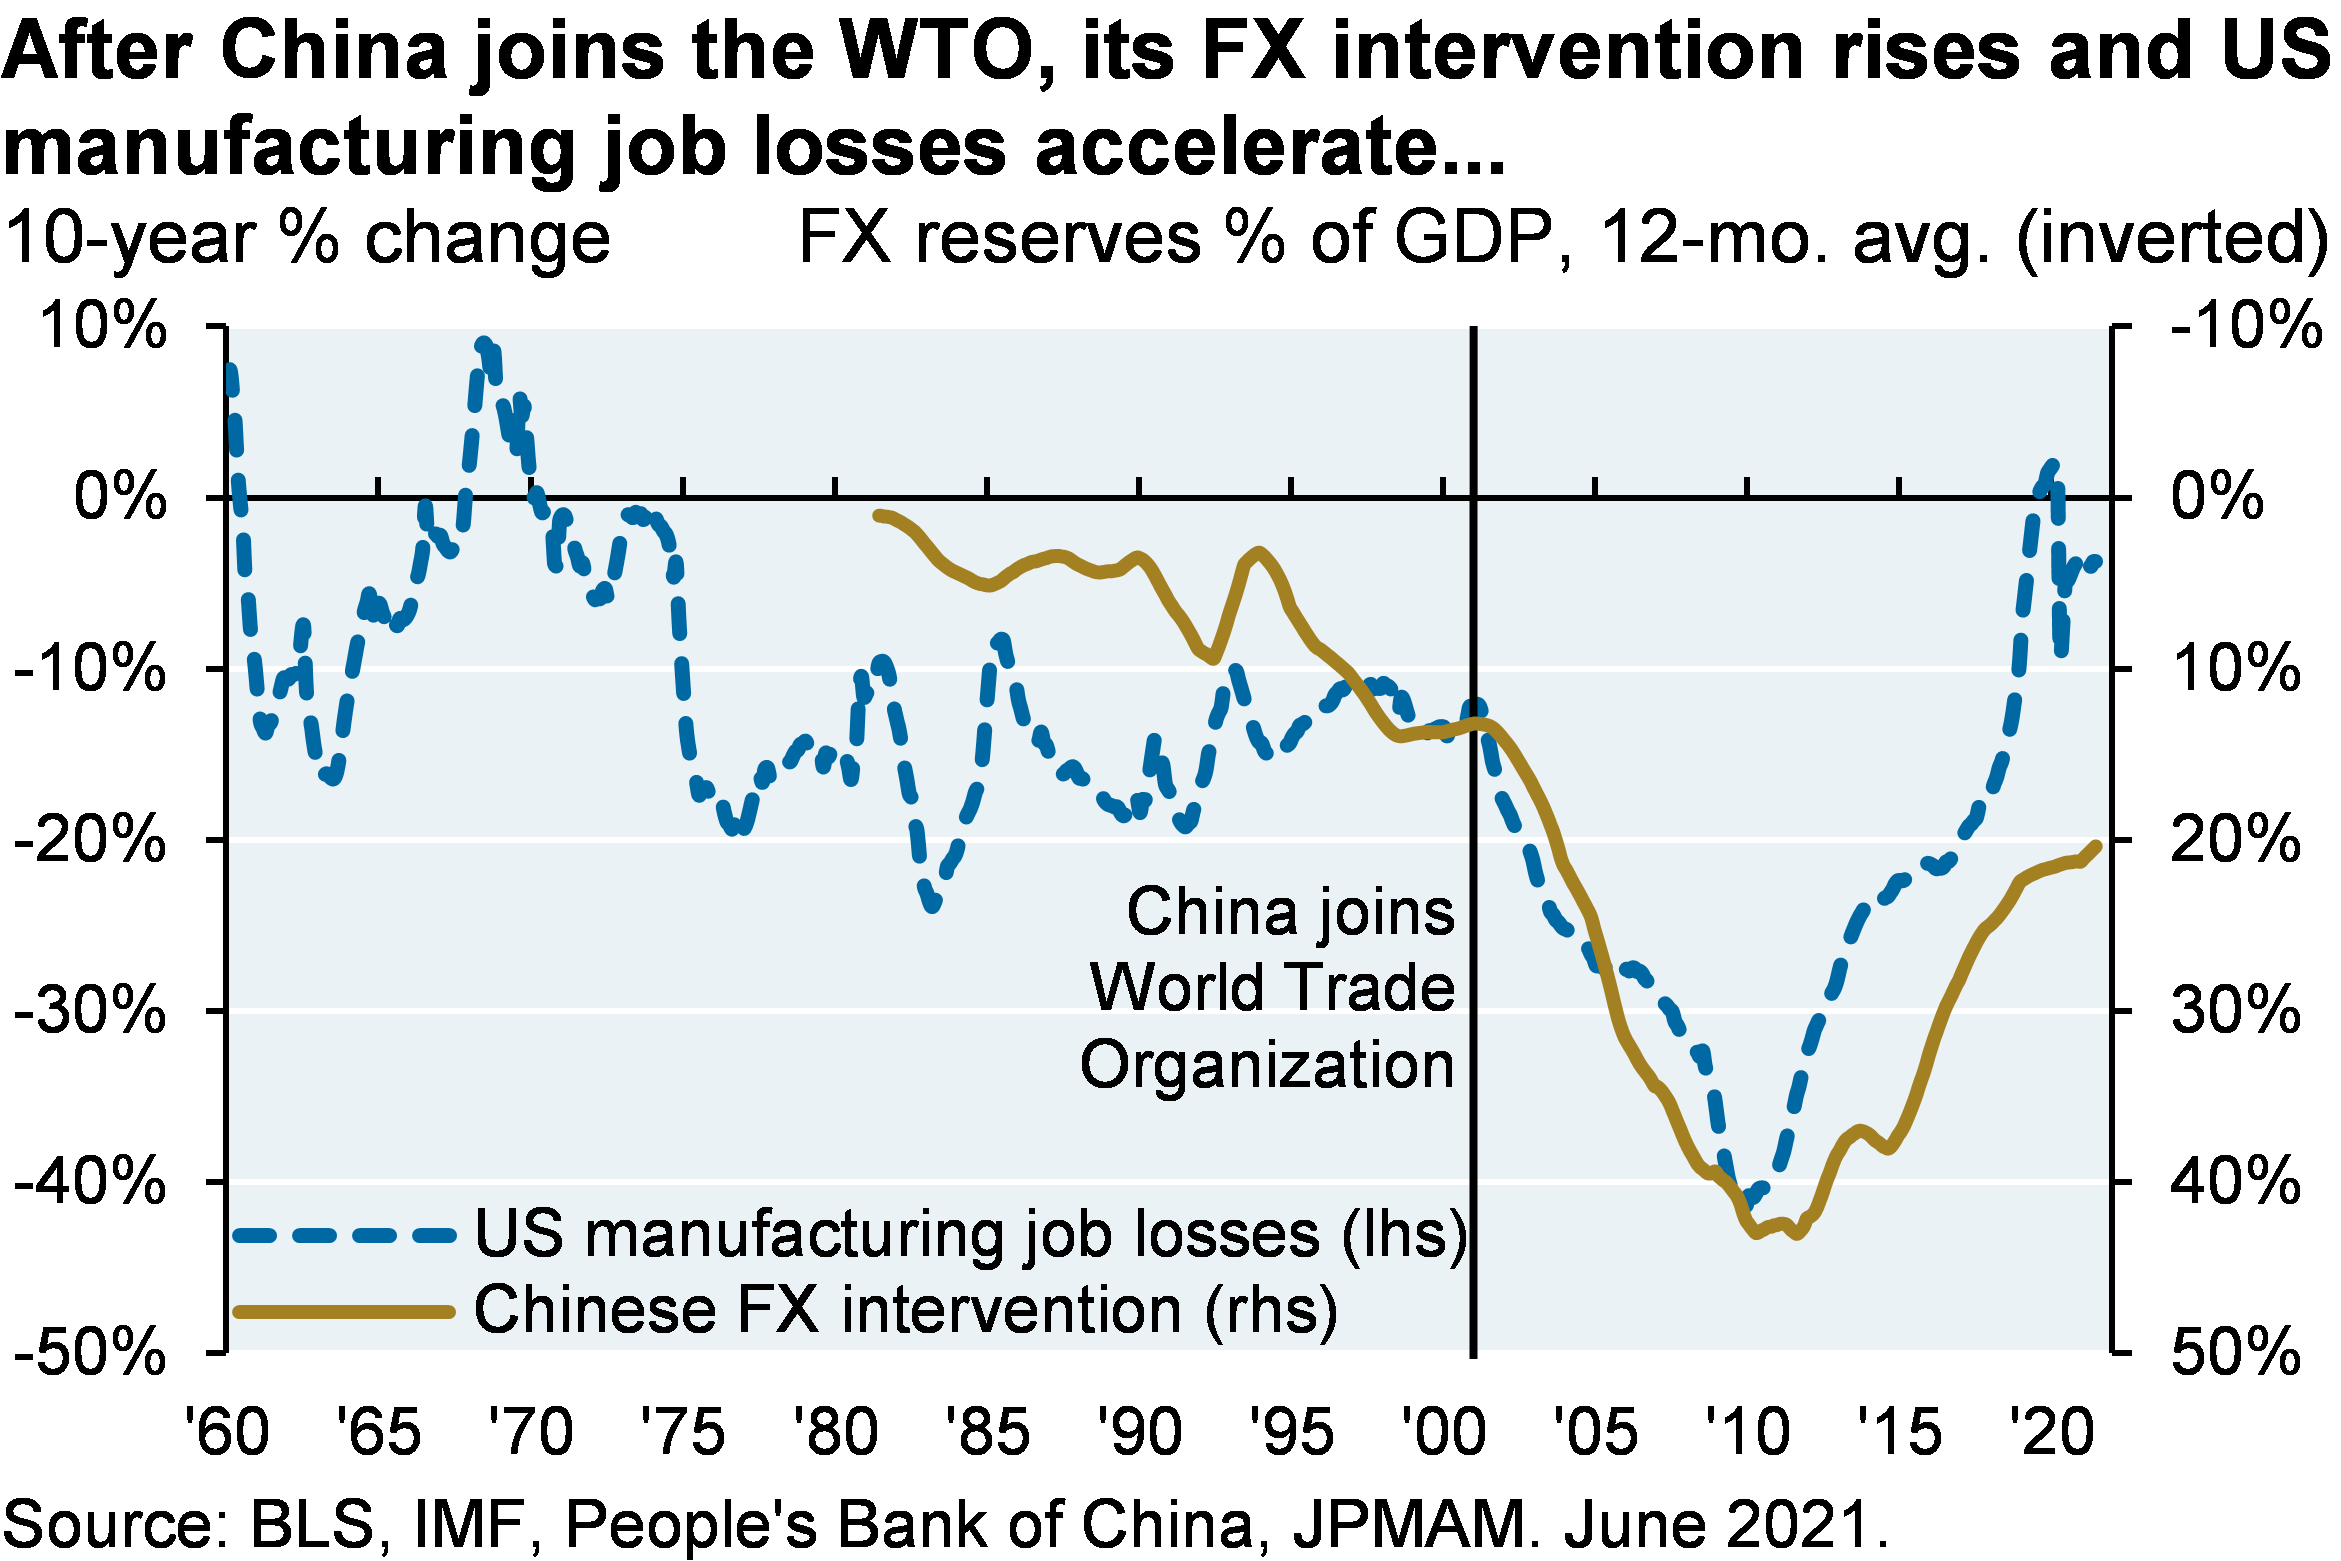 After China joins the WTO, its FX intervention rises and US manufacturing job losses accelerate...